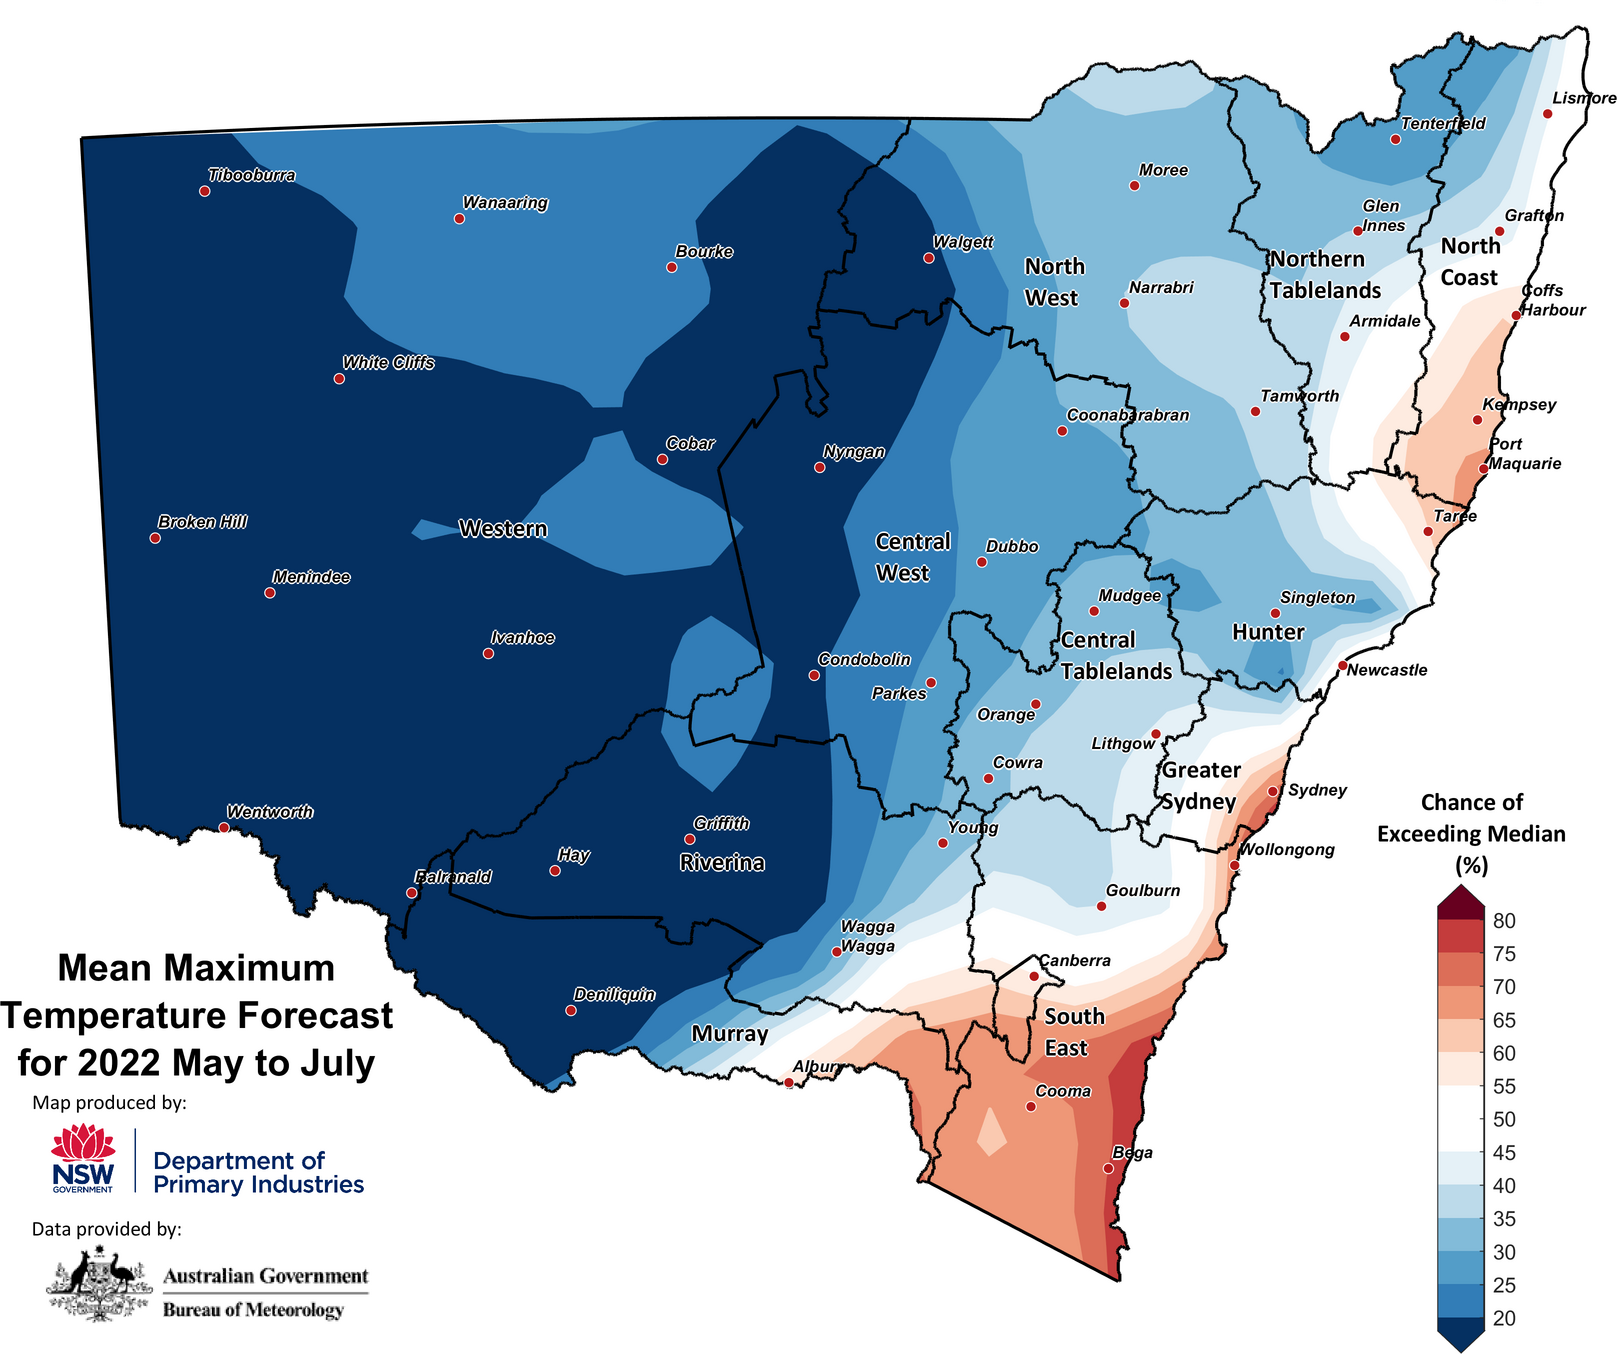 Figure 27. Seasonal average maximum temperature outlook for NSW issued on 28 April 2022